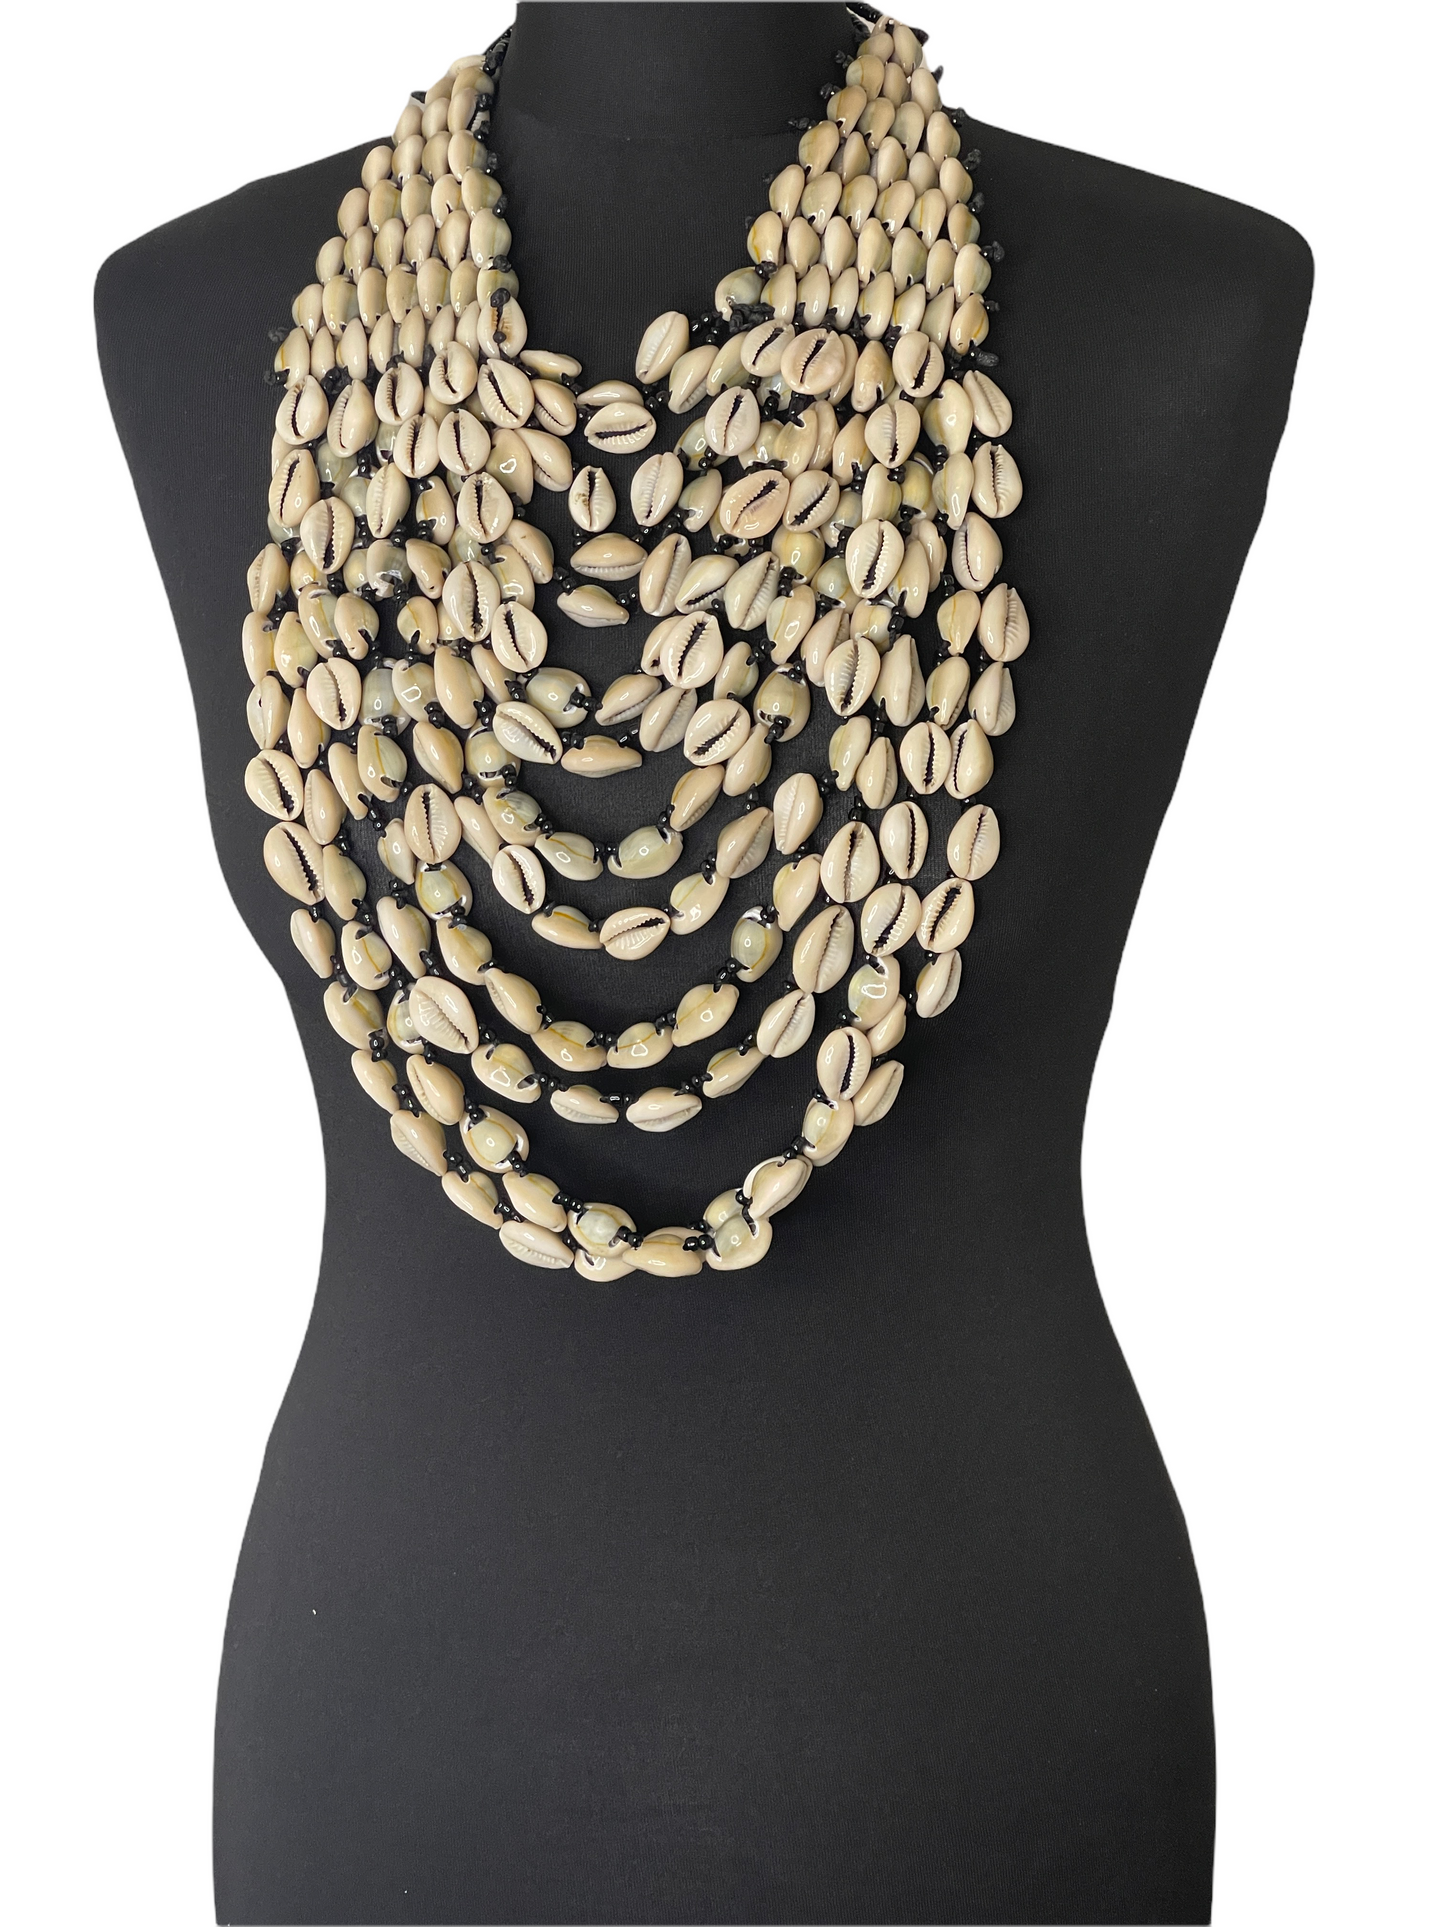 Authentic African Statement Ethnic Cowrie Sea Shell Beaded Collar Necklace